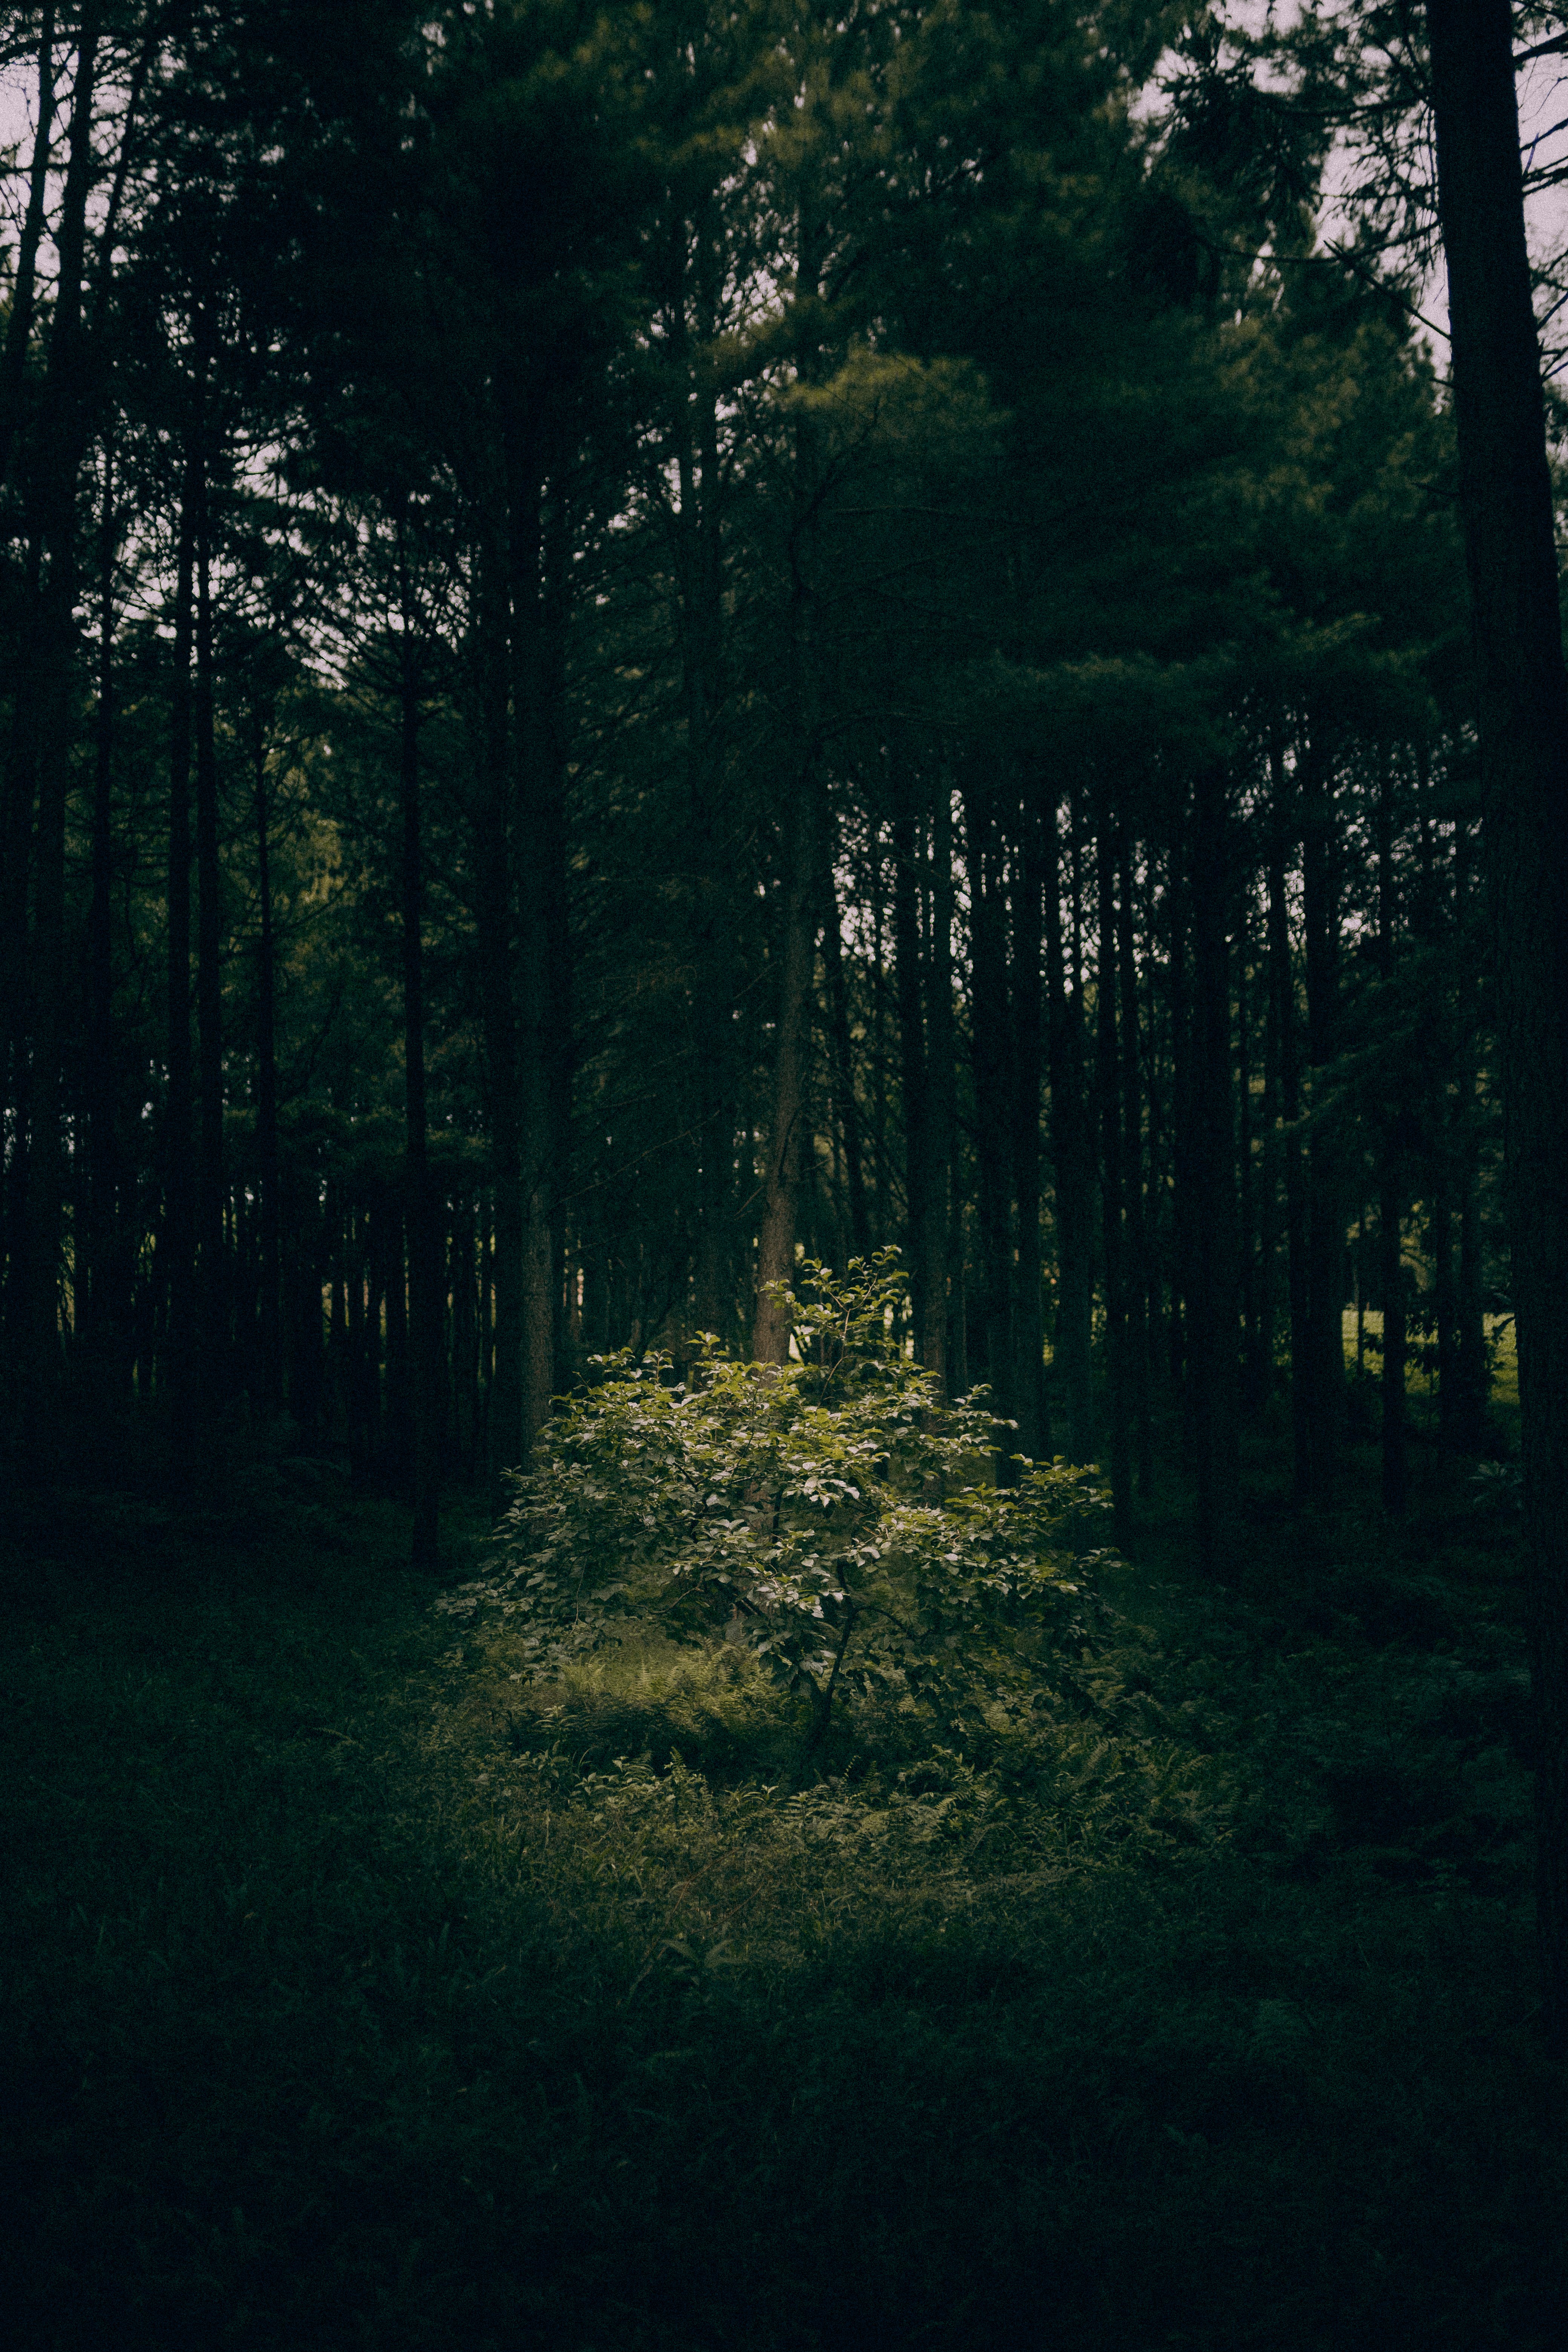 A dark forest with a small patch of sunlight on a mound of dirt. - Woods